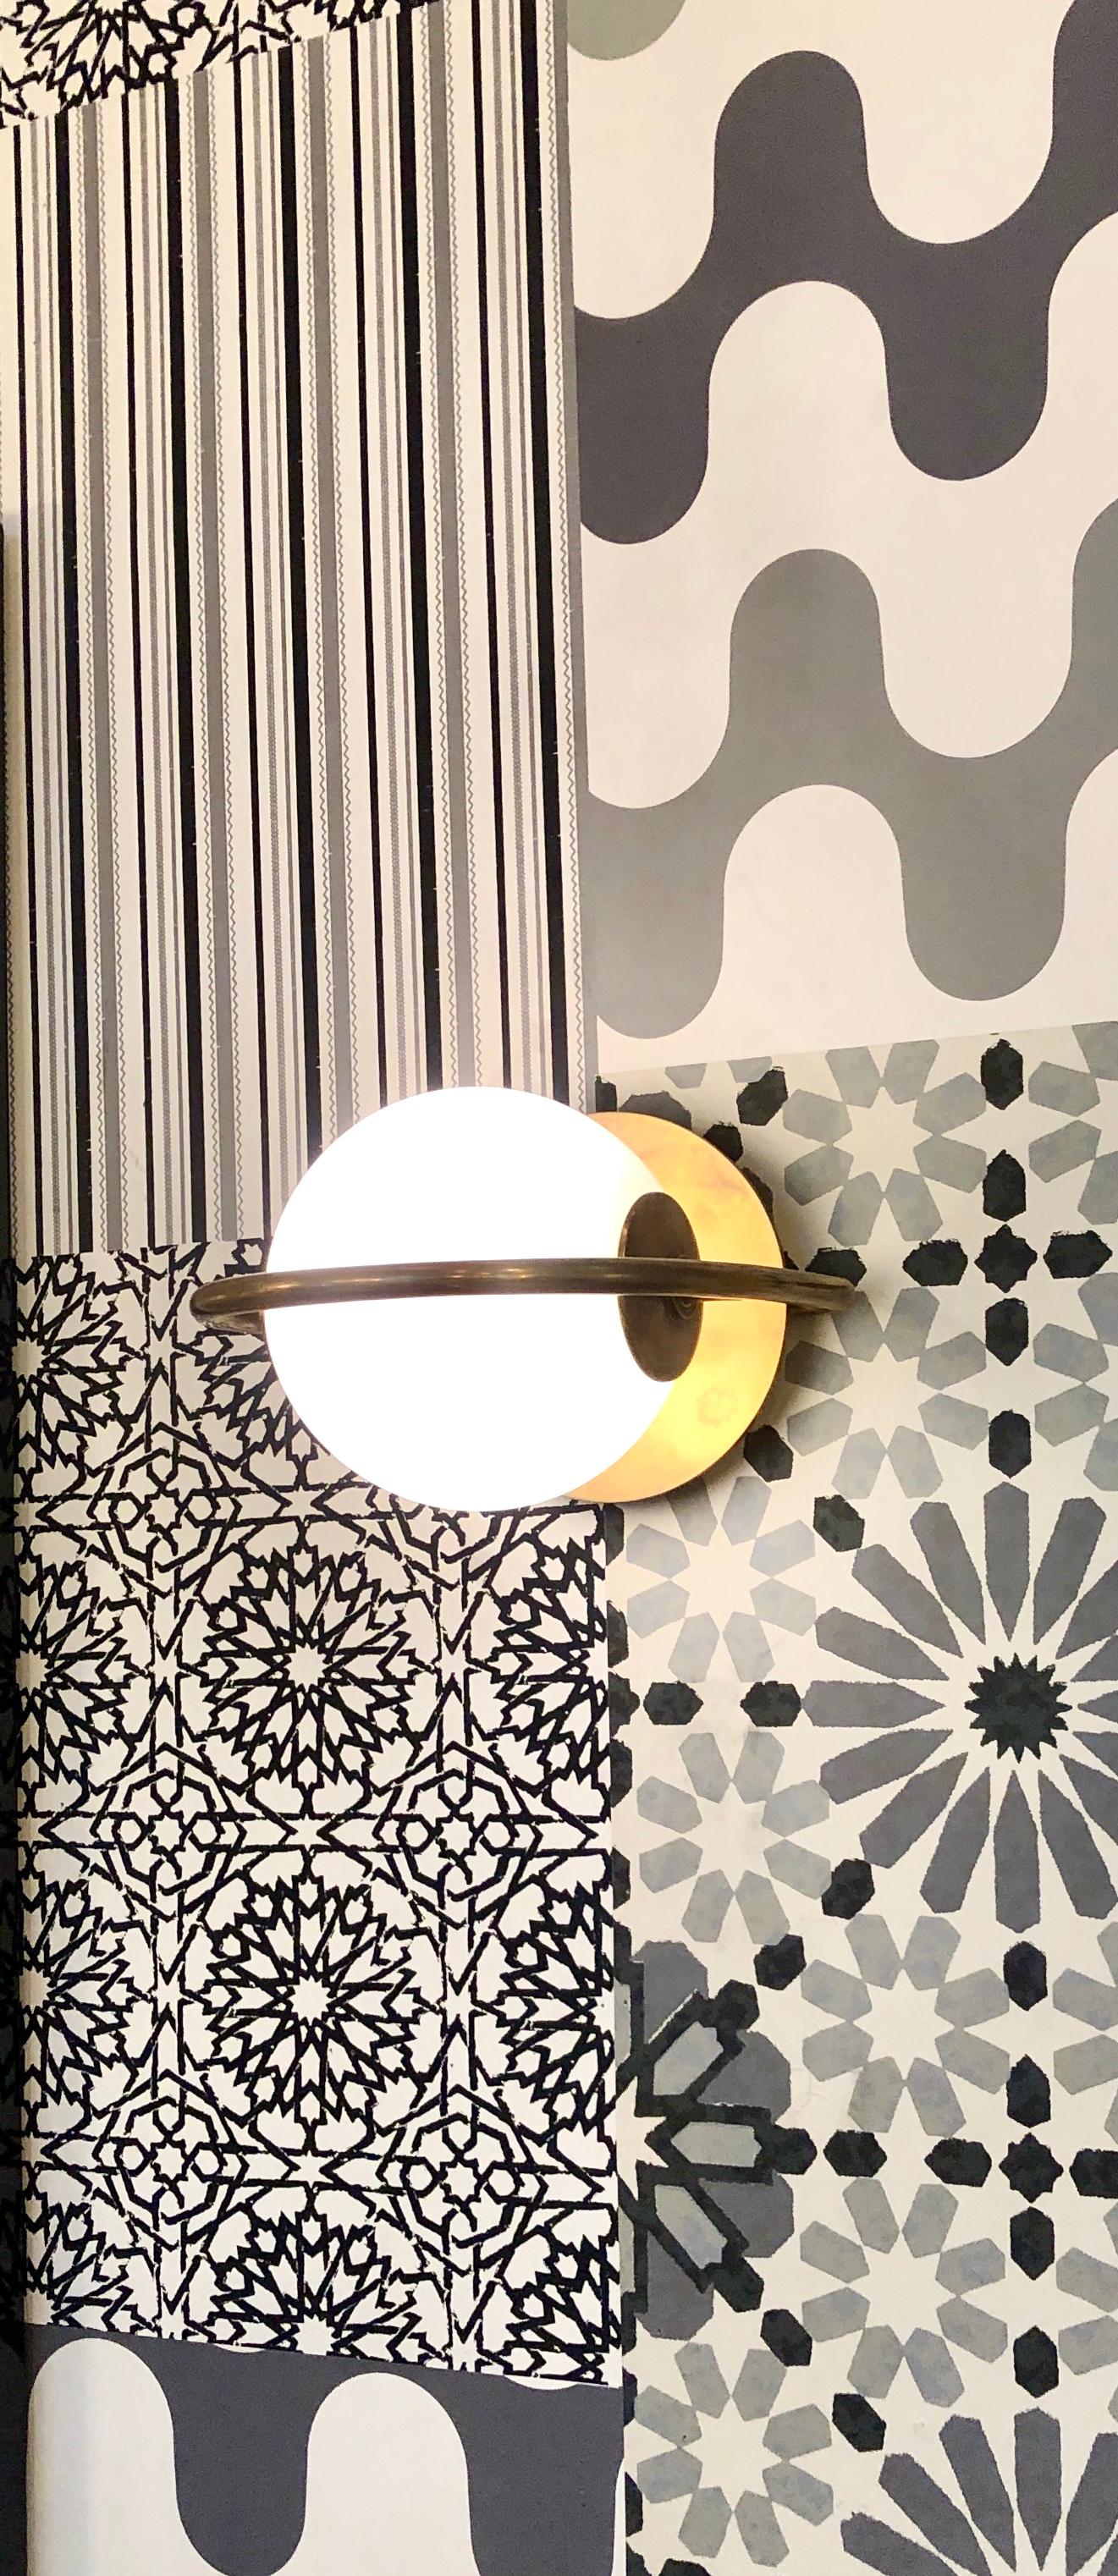 1-light wall sconce. Inspired by a pearl earring once belonging to Elizabeth Taylor, Everley exudes modern simplicity and a sense of luxury. Its asymmetry and alluring use of negative space charm in vintage brass. Everley is at once elegant and